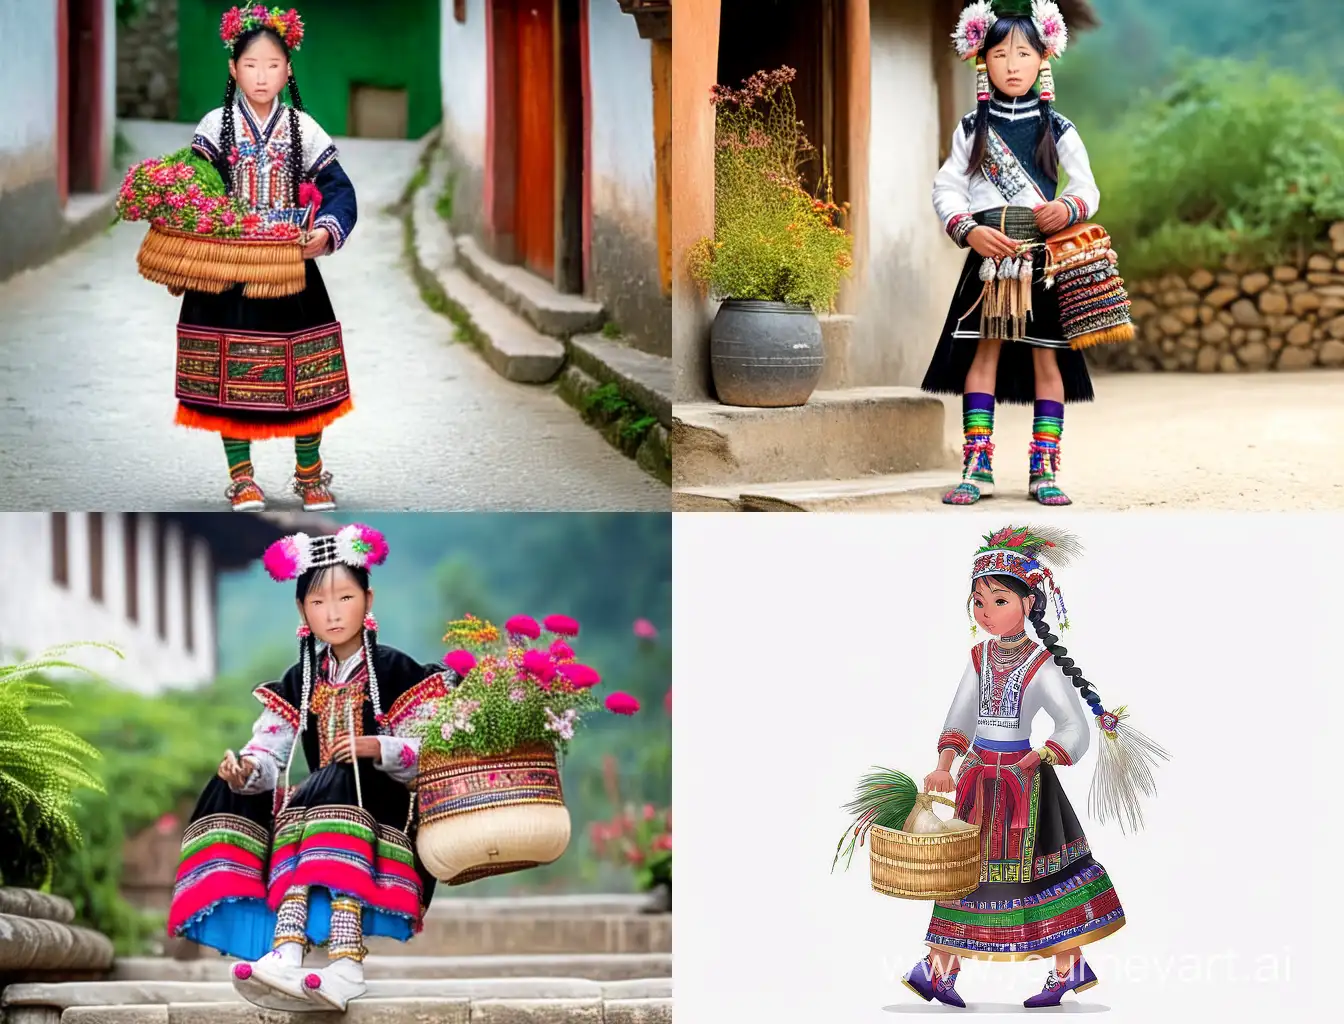 A beautifully illustrated portrait of a 15 year old Miao ethnic minority girl with waist length black hair, wearing traditional Miao clothing including a tight cropped top, loose sable fur vest, knee length pleated skirt, and colorful embroidered shoes. She has two braided pigtails and is wearing silver Miao jewelry on her head. She is carrying a bamboo tea basket full of fresh tea leaves, standing in a forest. Digital art by Artgerm and Greg Rutkowski and Mark Ryden.